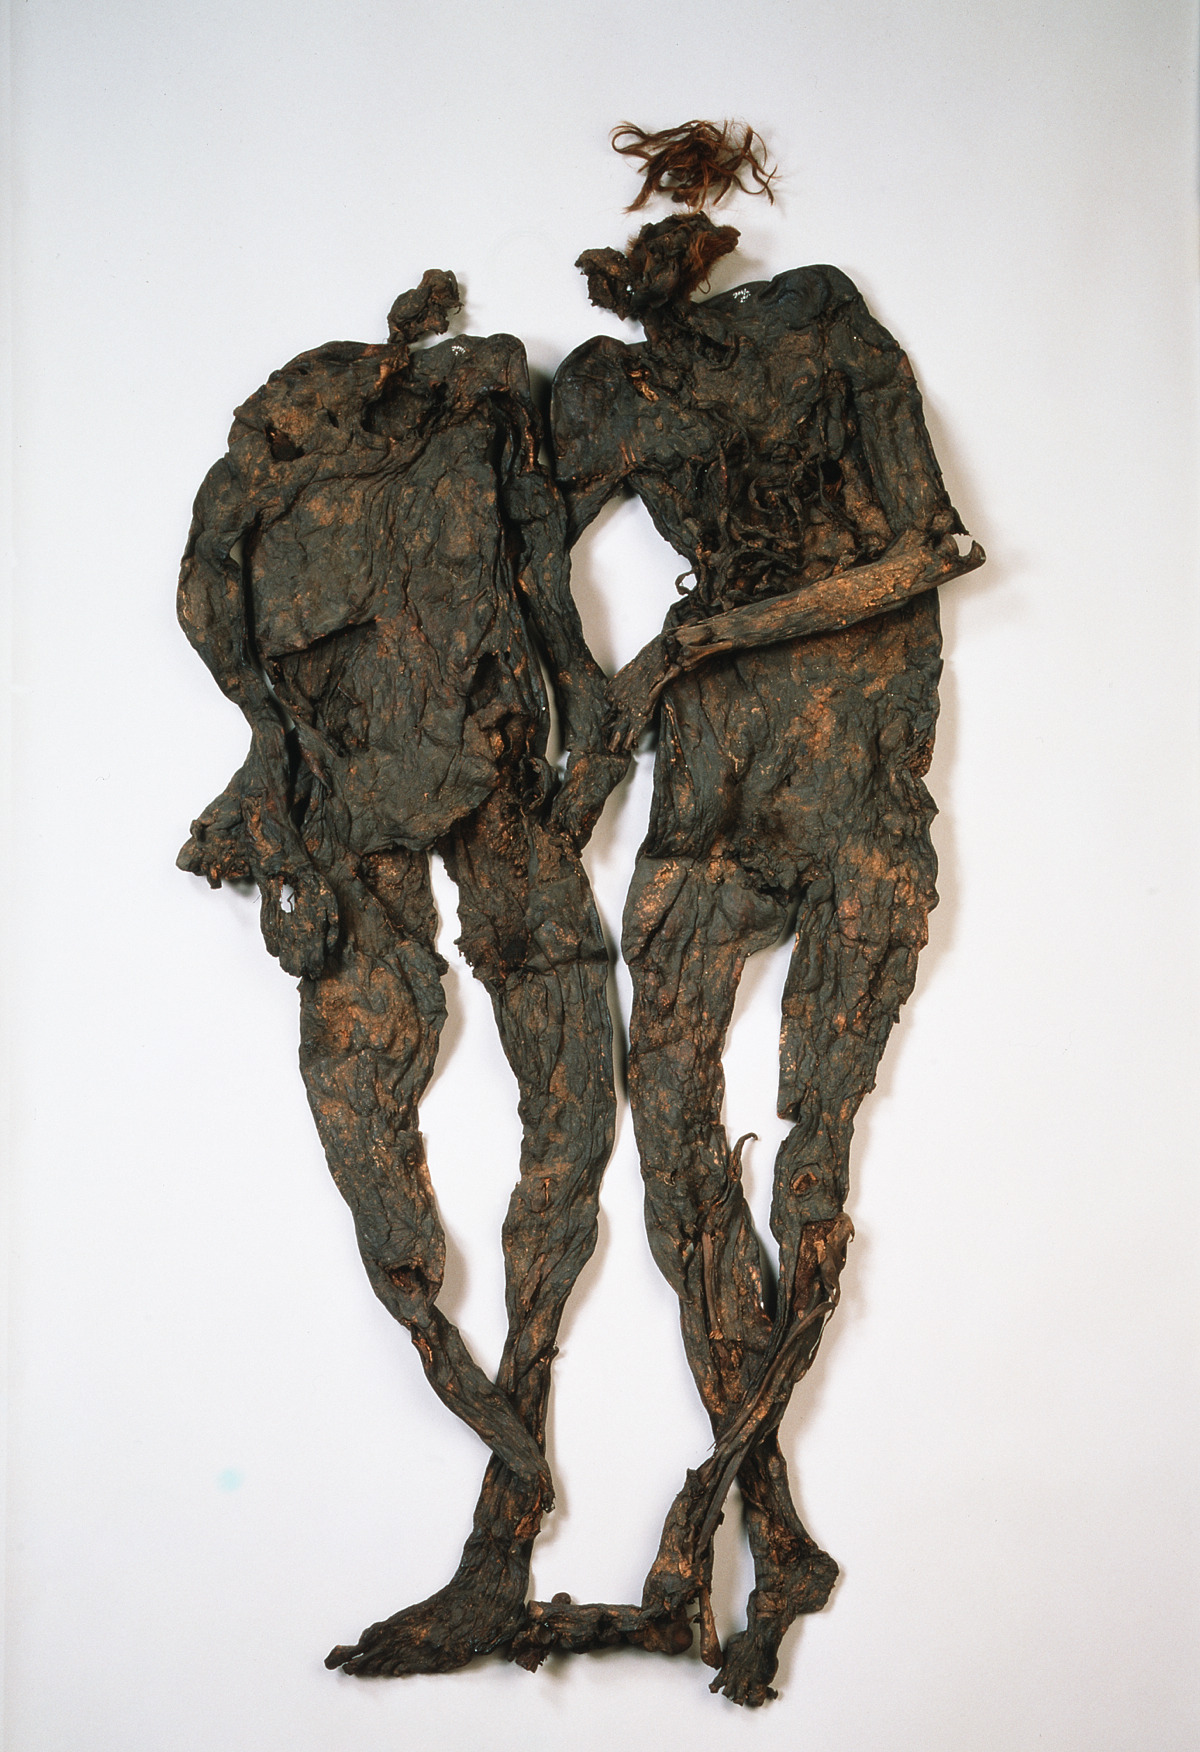 The Weerdinge Men, found in Drenthe, The Netherlands in 1904
Two of the best preserved bog bodies of the Netherlands were found laying together in the Bourtanger Moor by a peat-cutter in 1904. They are estimated to have died somewhere between 170 BC...